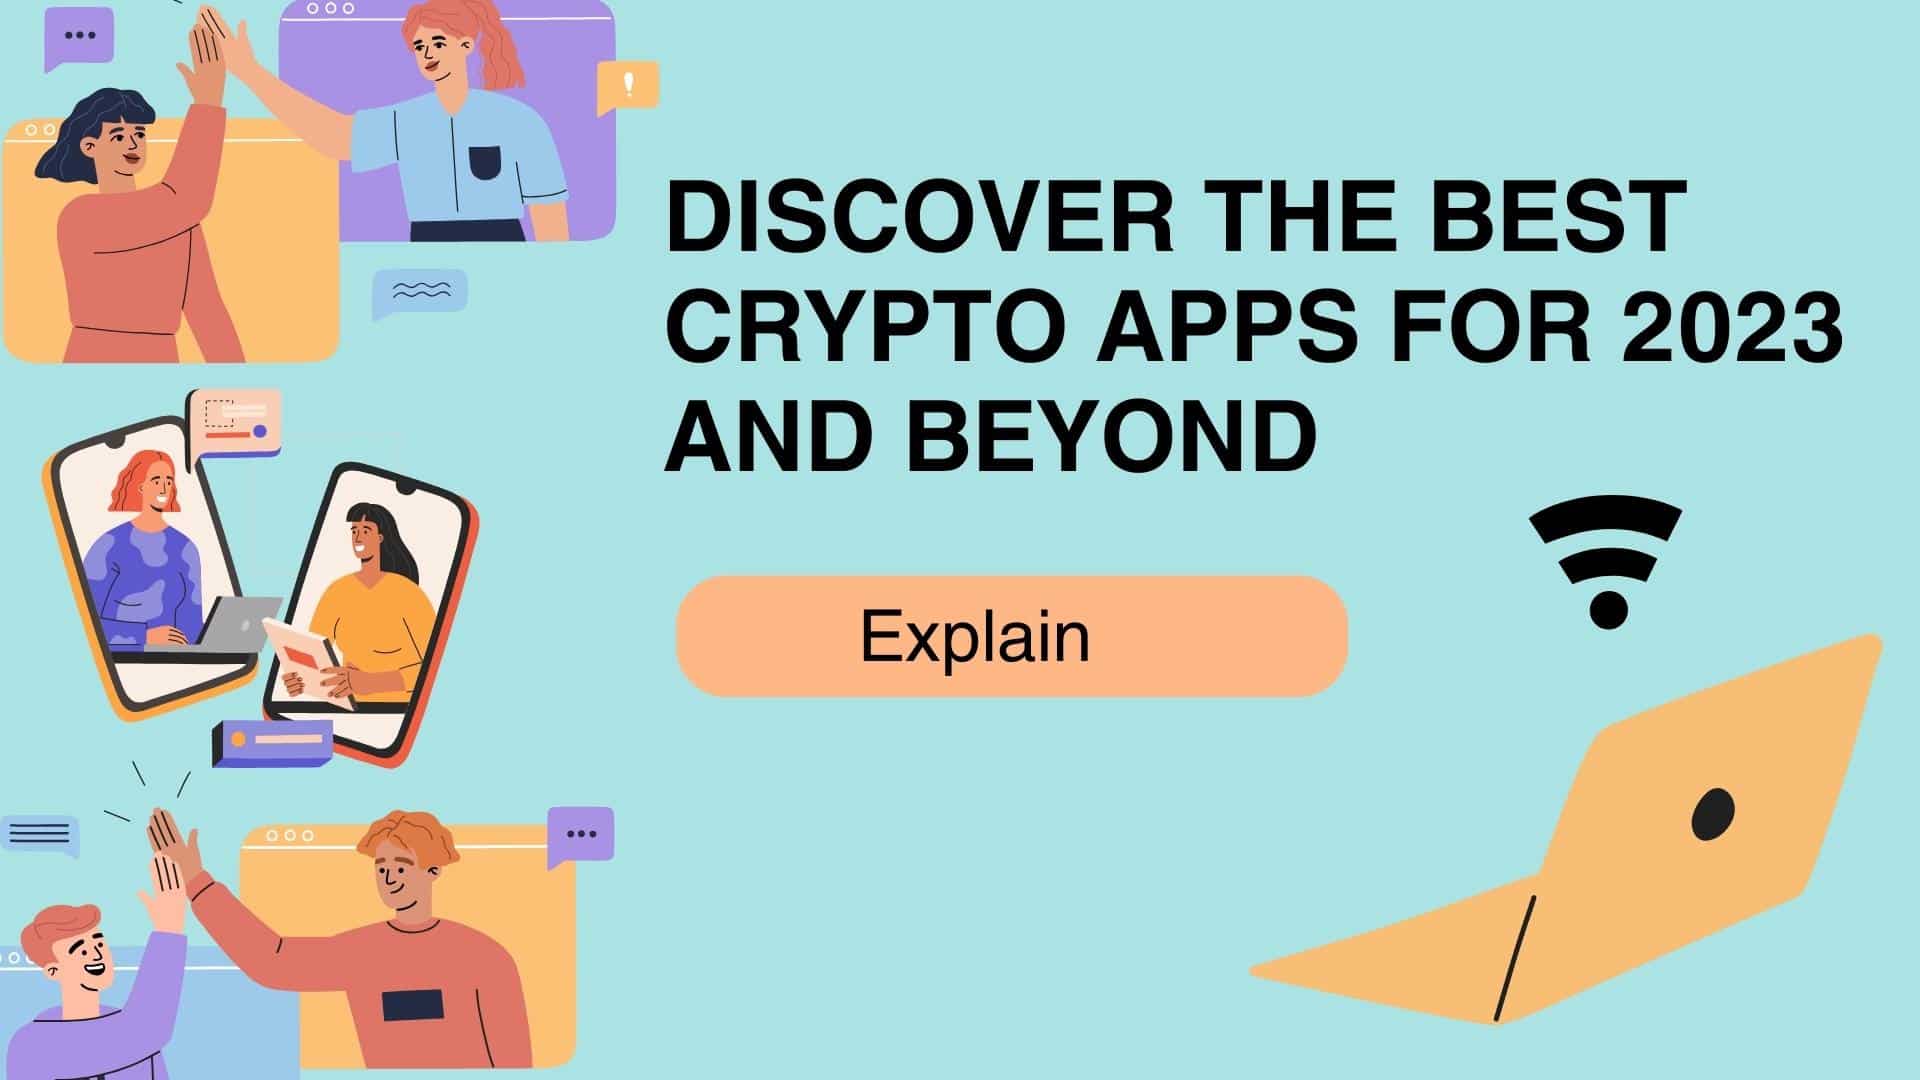 Discover the Best Crypto Apps for 2023 and Beyond